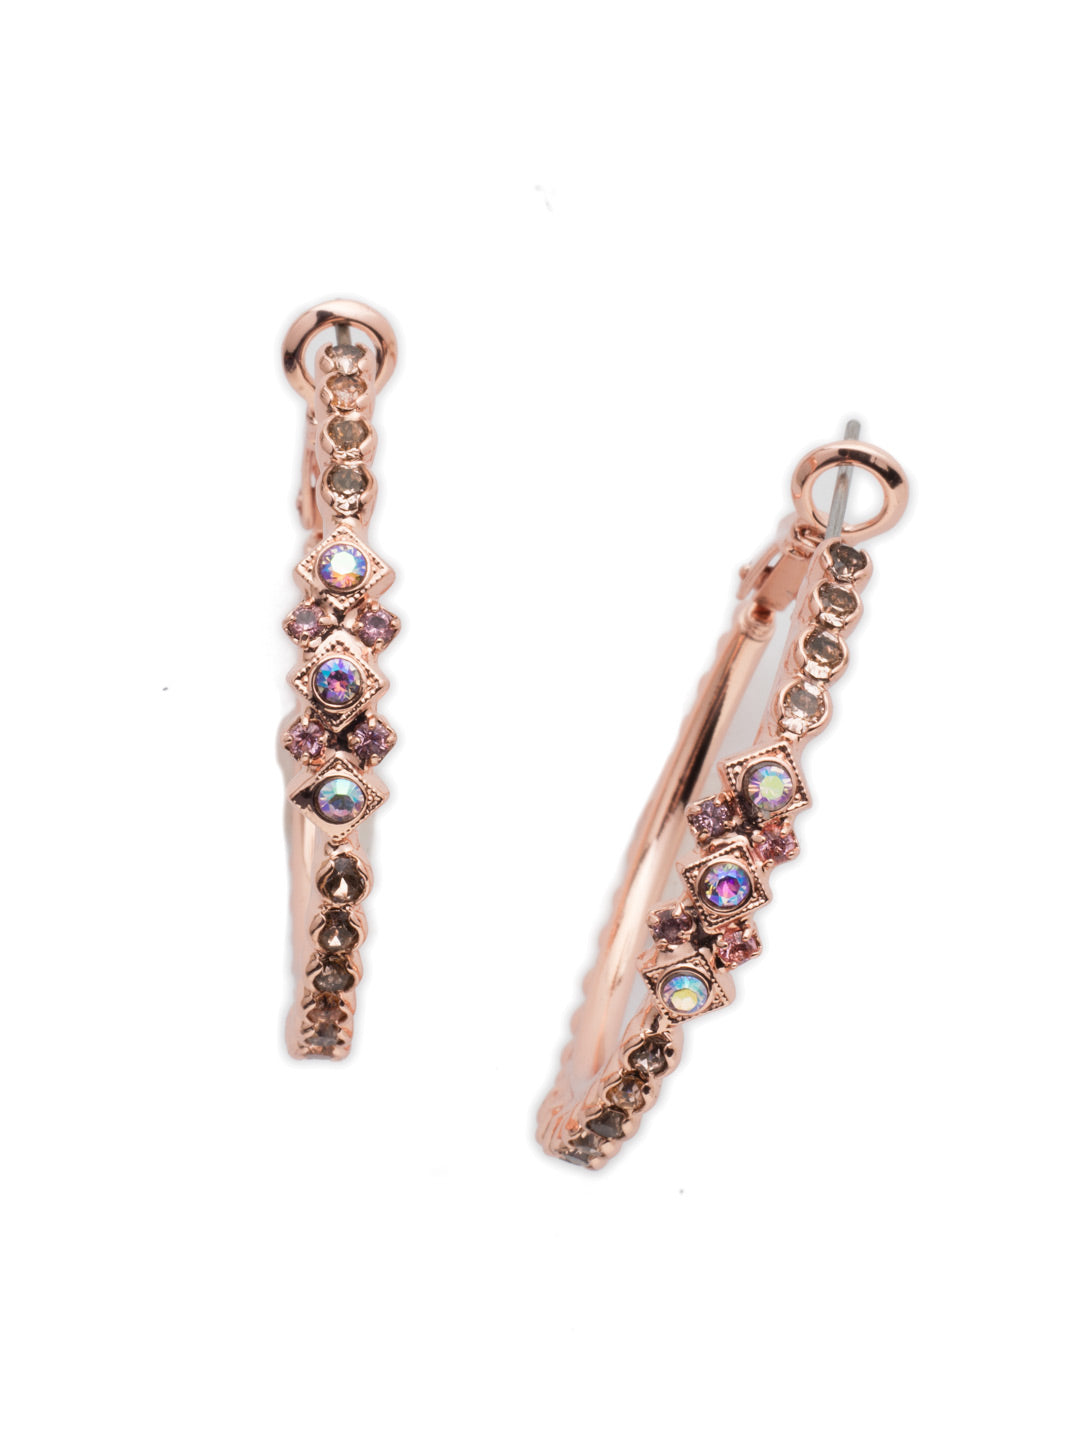 Athena Hoop Earrings - EEN5RGLVP - The Athena Hoop Earrings are a must for the hoop and sparkle lover. Rimmed in shimmering crystals from front to back, they really bring on the bling. From Sorrelli's Lavender Peach collection in our Rose Gold-tone finish.